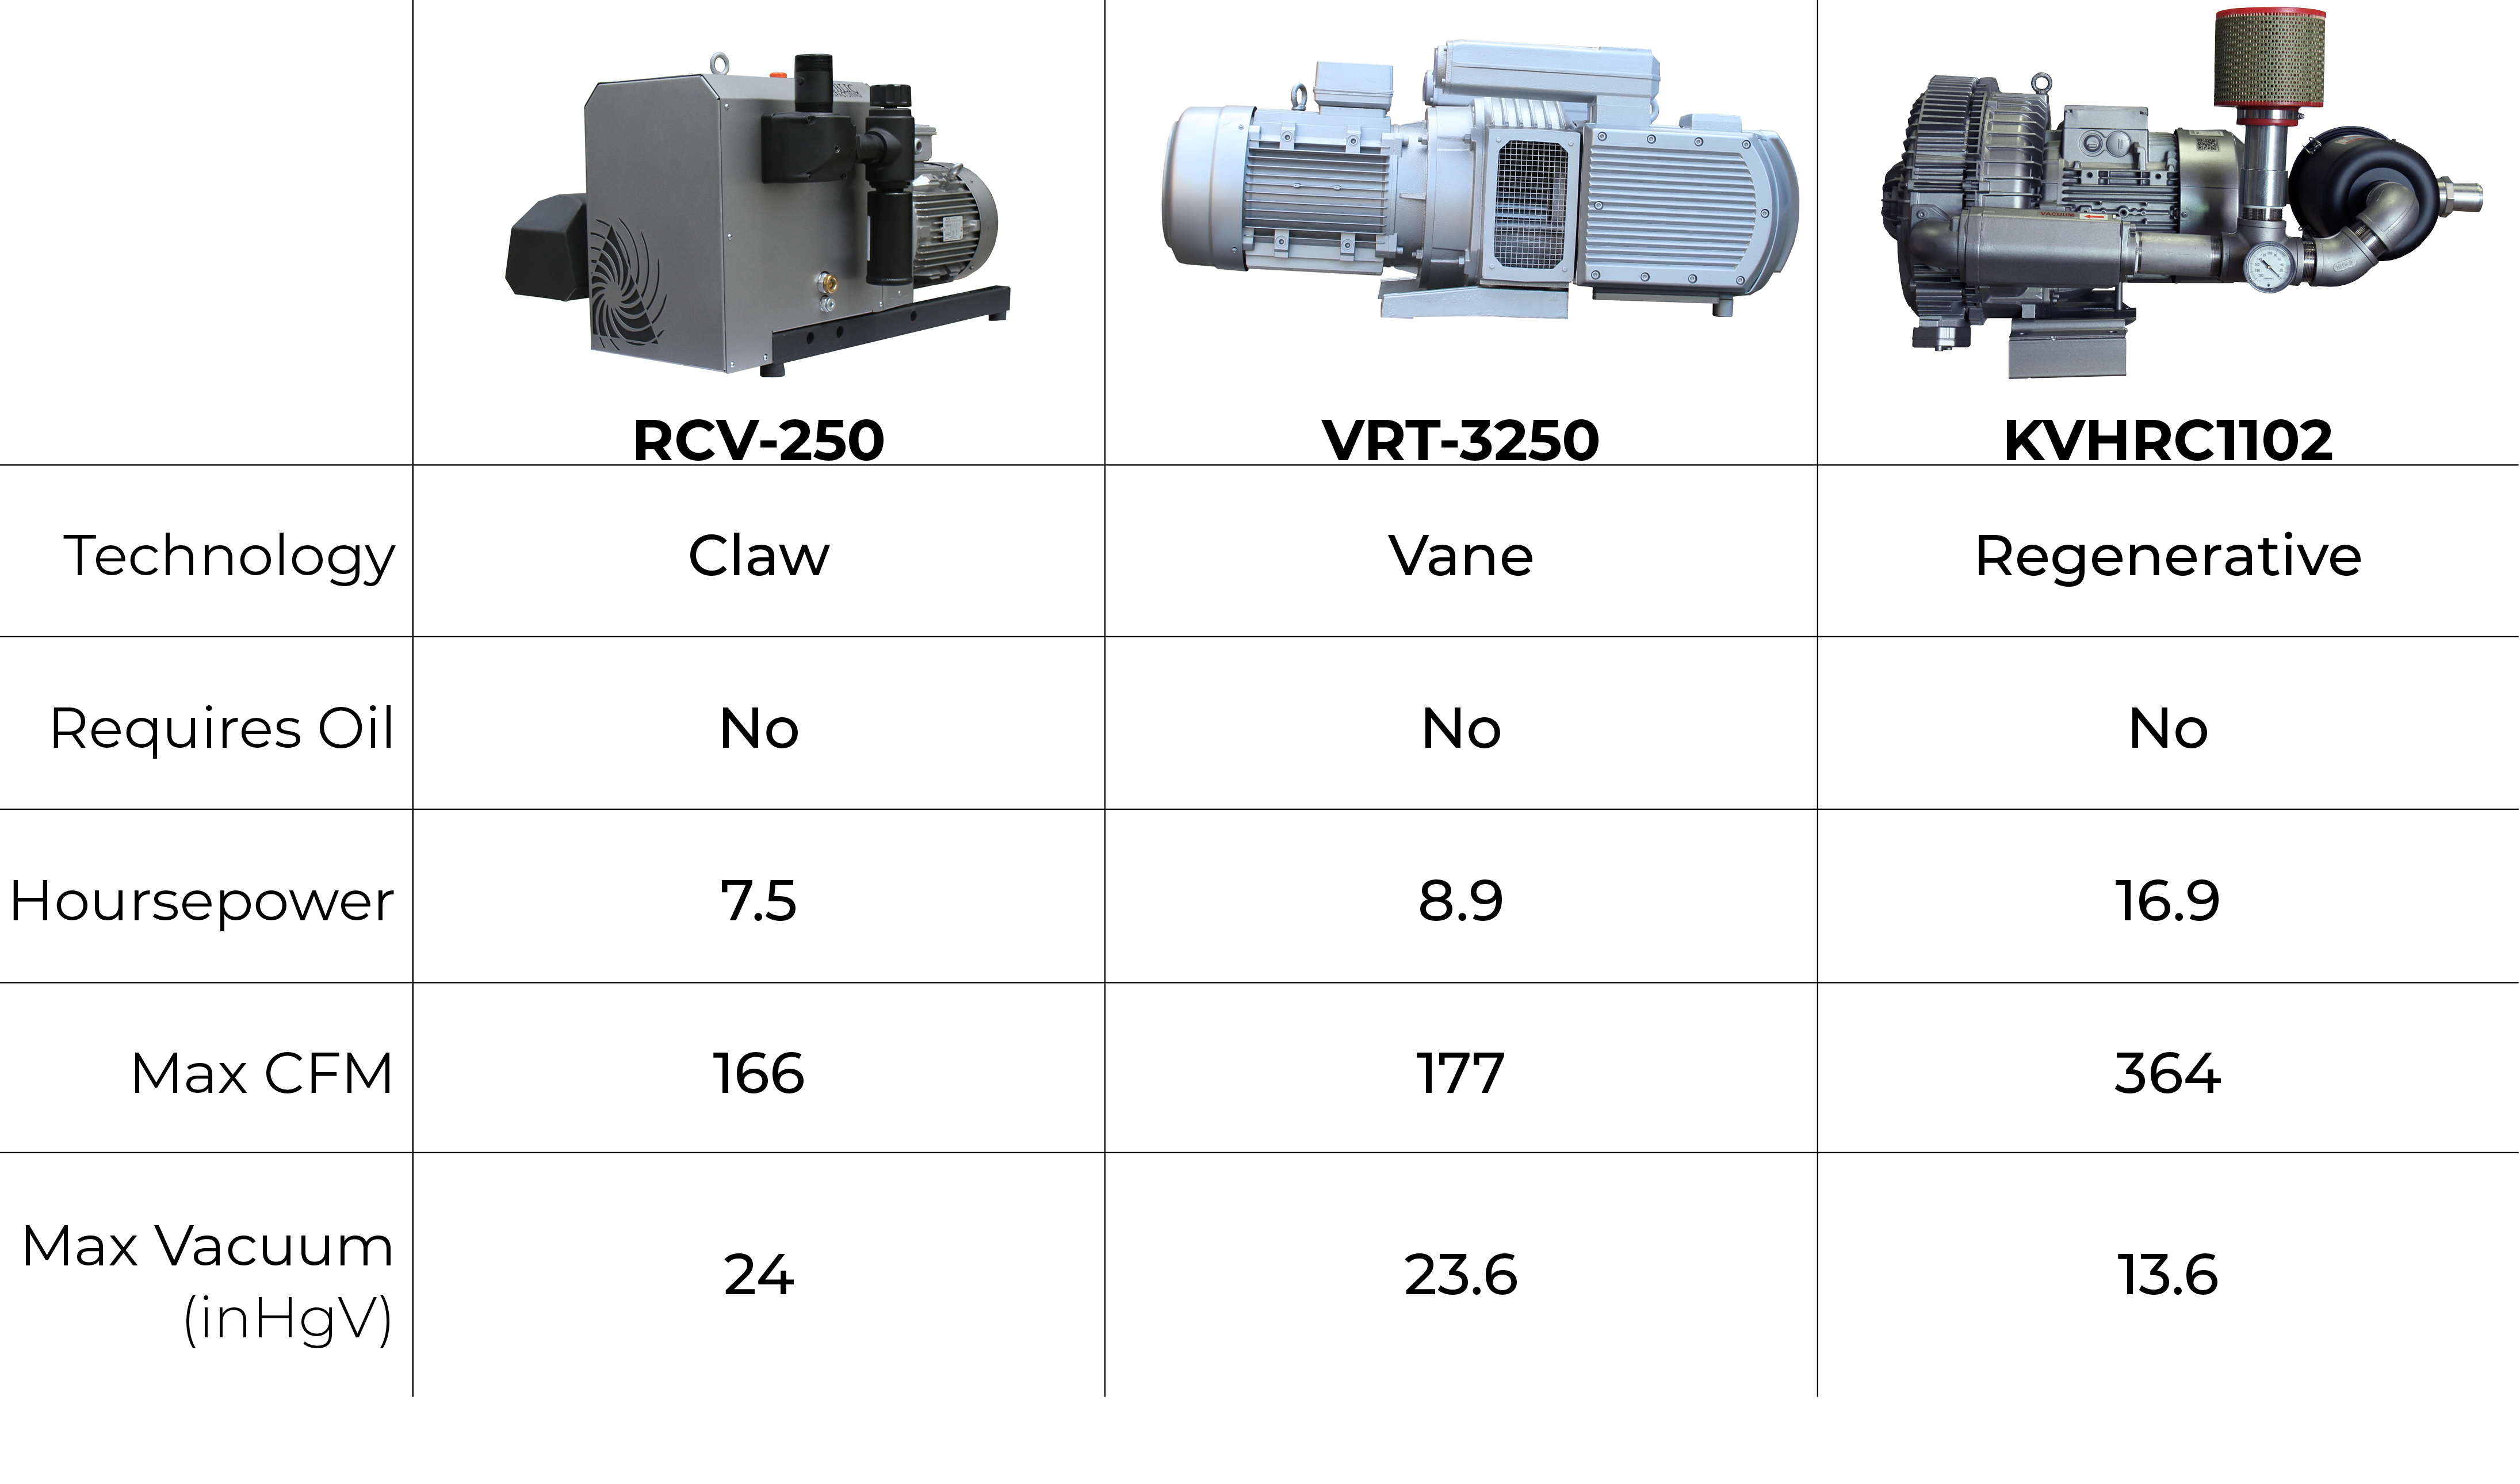 A chart comparing the RCV-250, VRT-3250, and KVHRC1102 vacuum pumps. The RCV-250 uses claw technology, does not require oil, and has an output of 7.5 horsepower, a max CFM of 166, and a max vacuum of 24 inches of mercury. The VRT-2350 uses vane technology, does not require oil, and has an output of 8.9 horsepower, a max CFM of 177, and a max vacuum of 23.6 inches of mercury. The KVHRC1102 uses regenerative technology, does not require oil, and has an output of 16.9 horsepower, a max CFM of 364, and a max vacuum of 13.6 inches of mercury. 